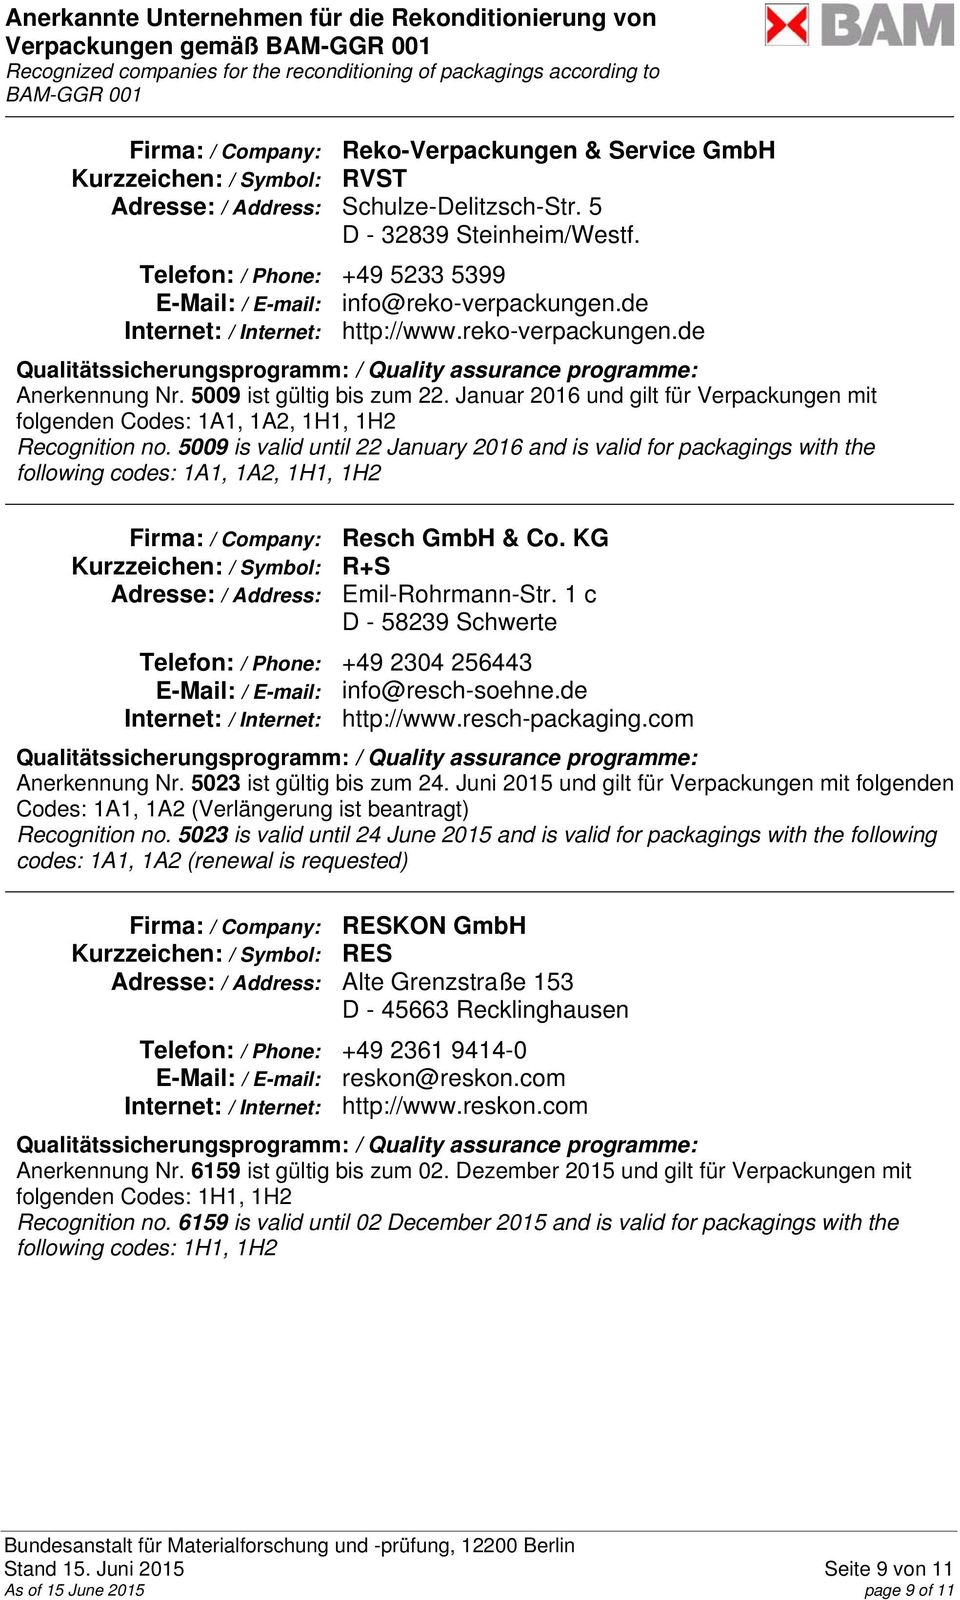 Januar 2016 und gilt für Verpackungen mit Recognition no. 5009 is valid until 22 January 2016 and is valid for packagings with the Firma: / Company: Resch GmbH & Co.